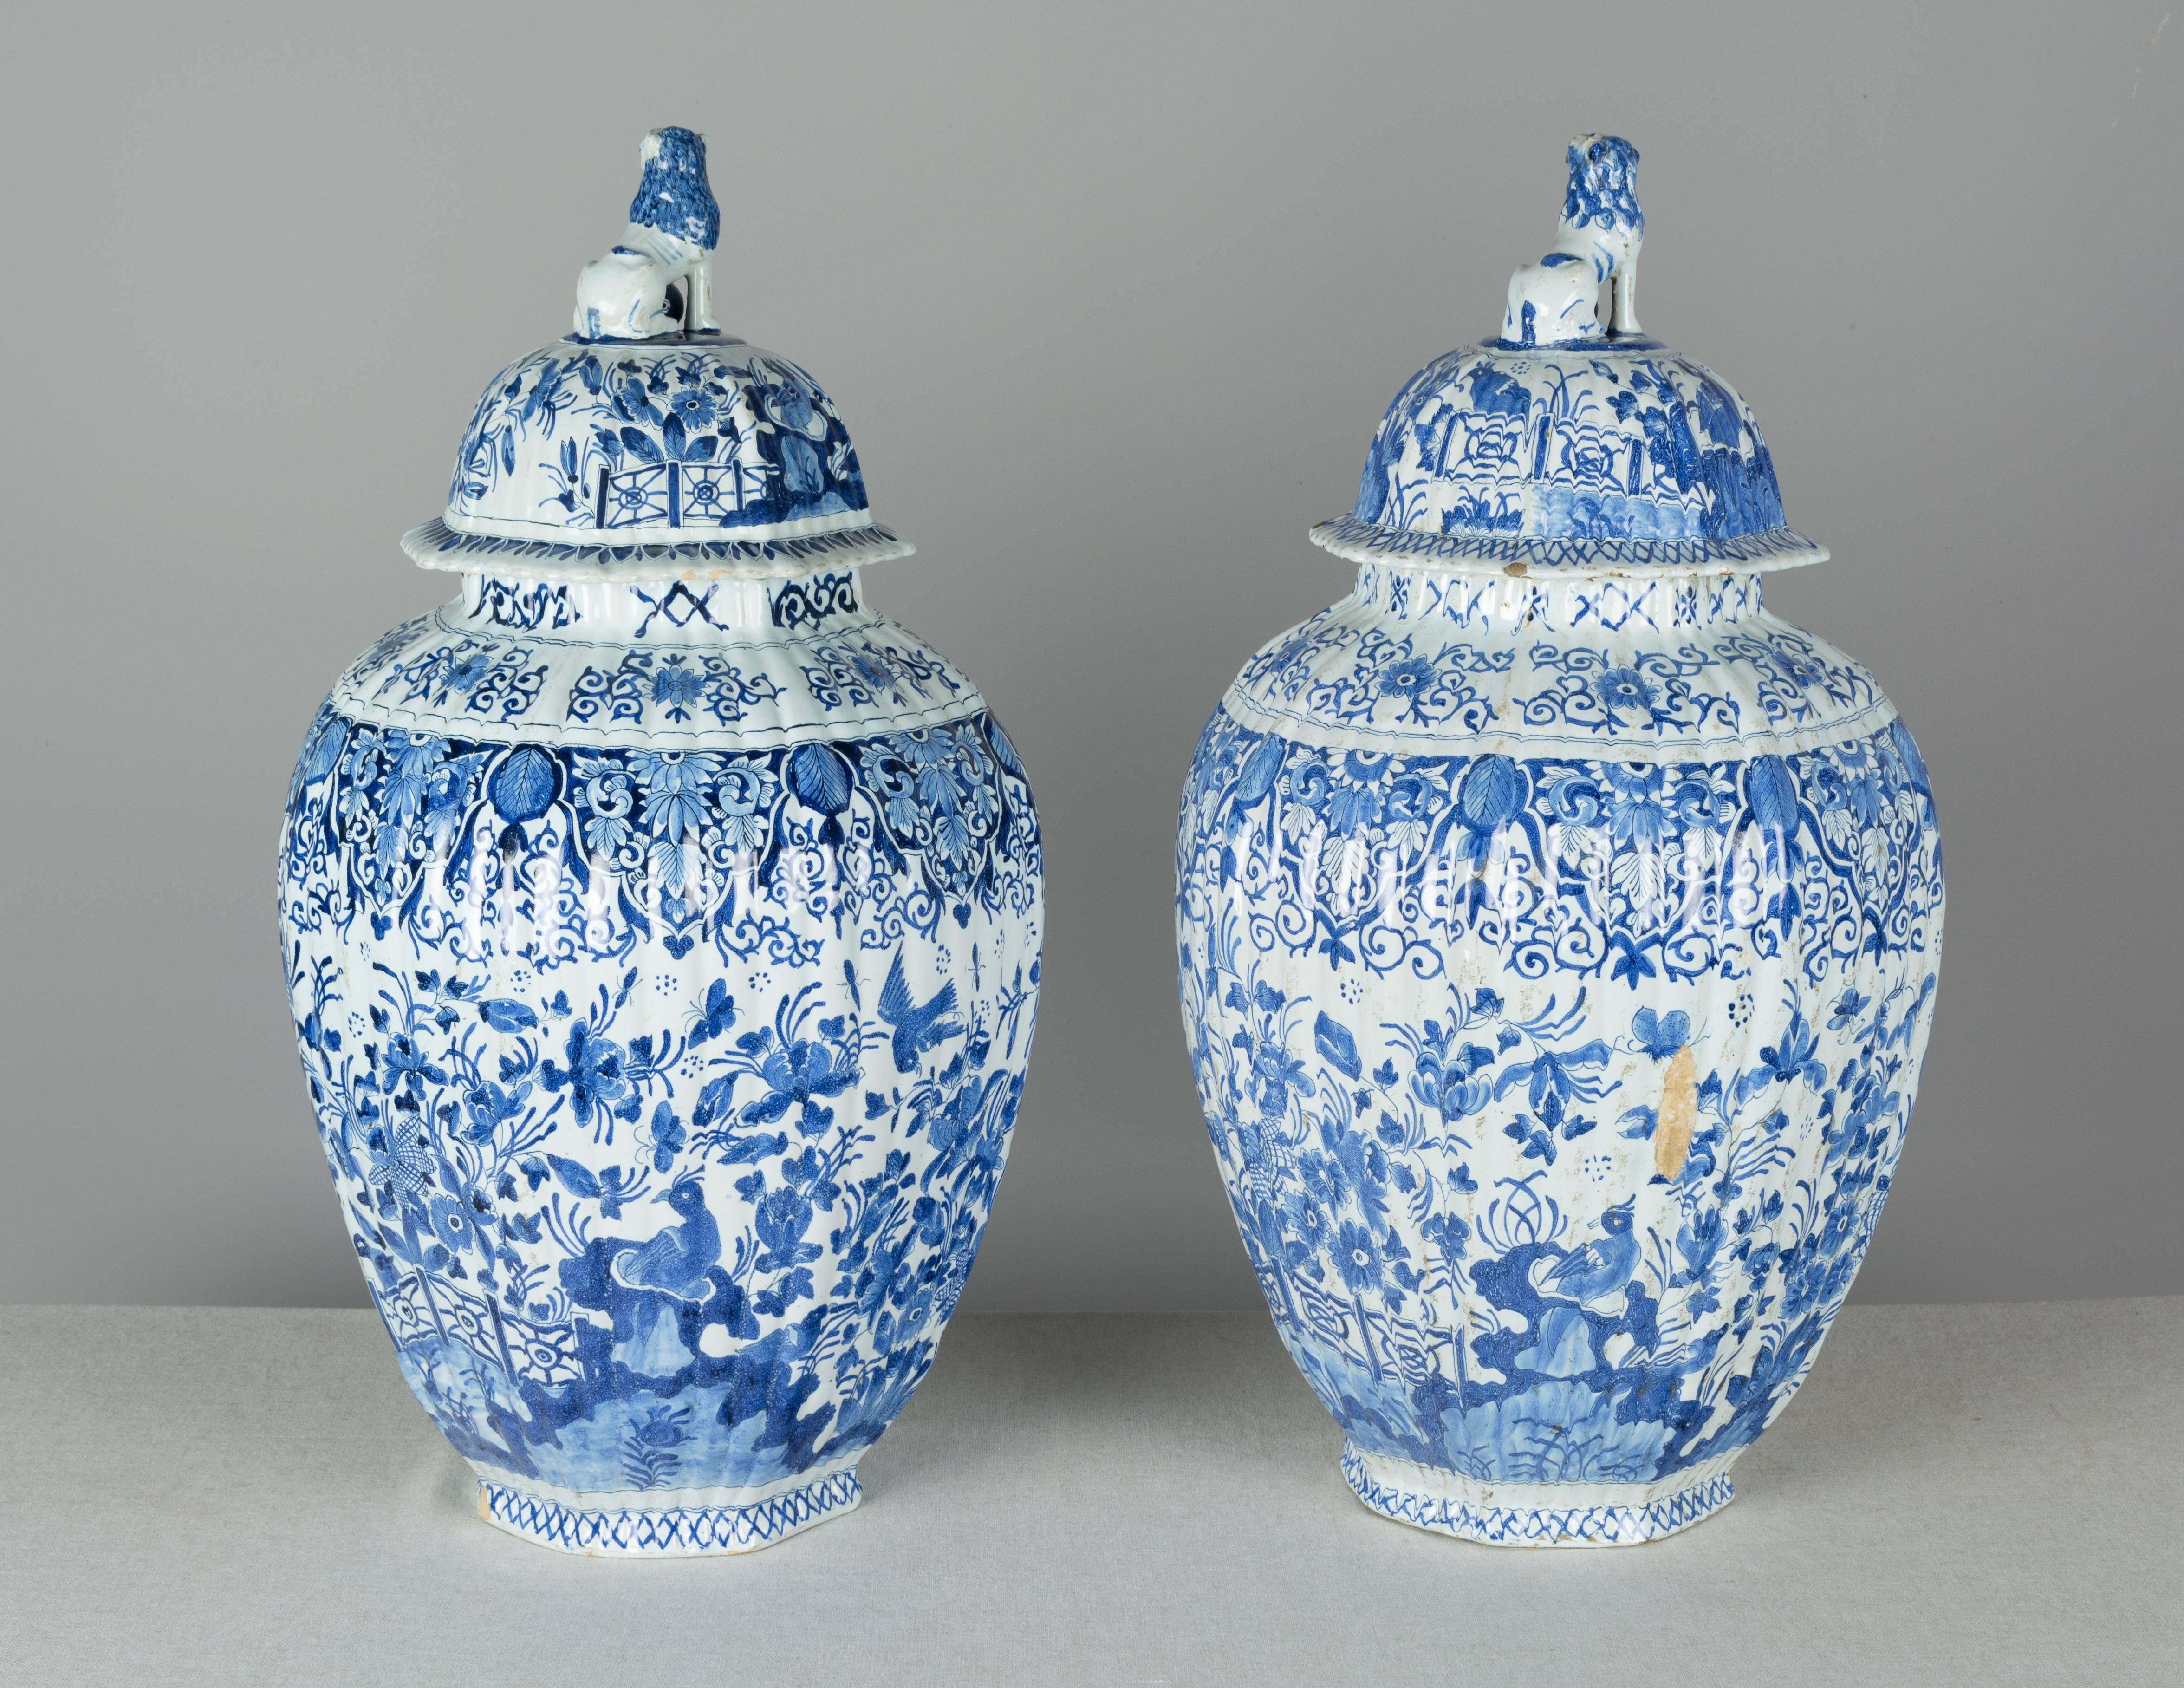 Pair of large 17th century delft faience lidded ginger jars with Chinoiserie decoration of birds and flowers inspired by the blue on white décor of Ming porcelain. Each bears the monogram LC, for Lambertus Cleffius, who directed the ceramics factory